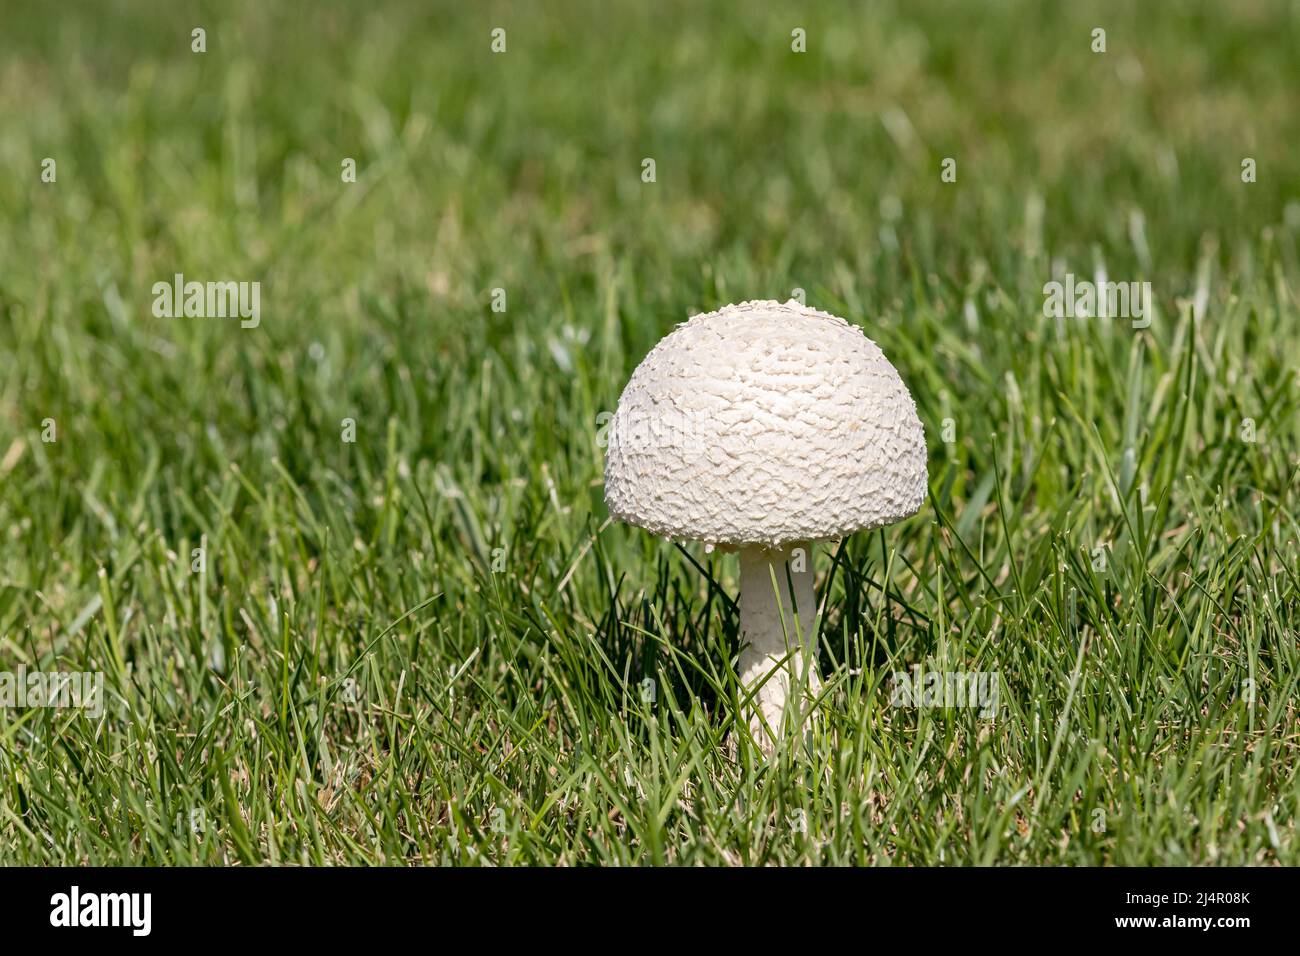 Closeup of white parasol mushroom in yard. Concept of lawn care, landscaping and poisonous mushrooms Stock Photo